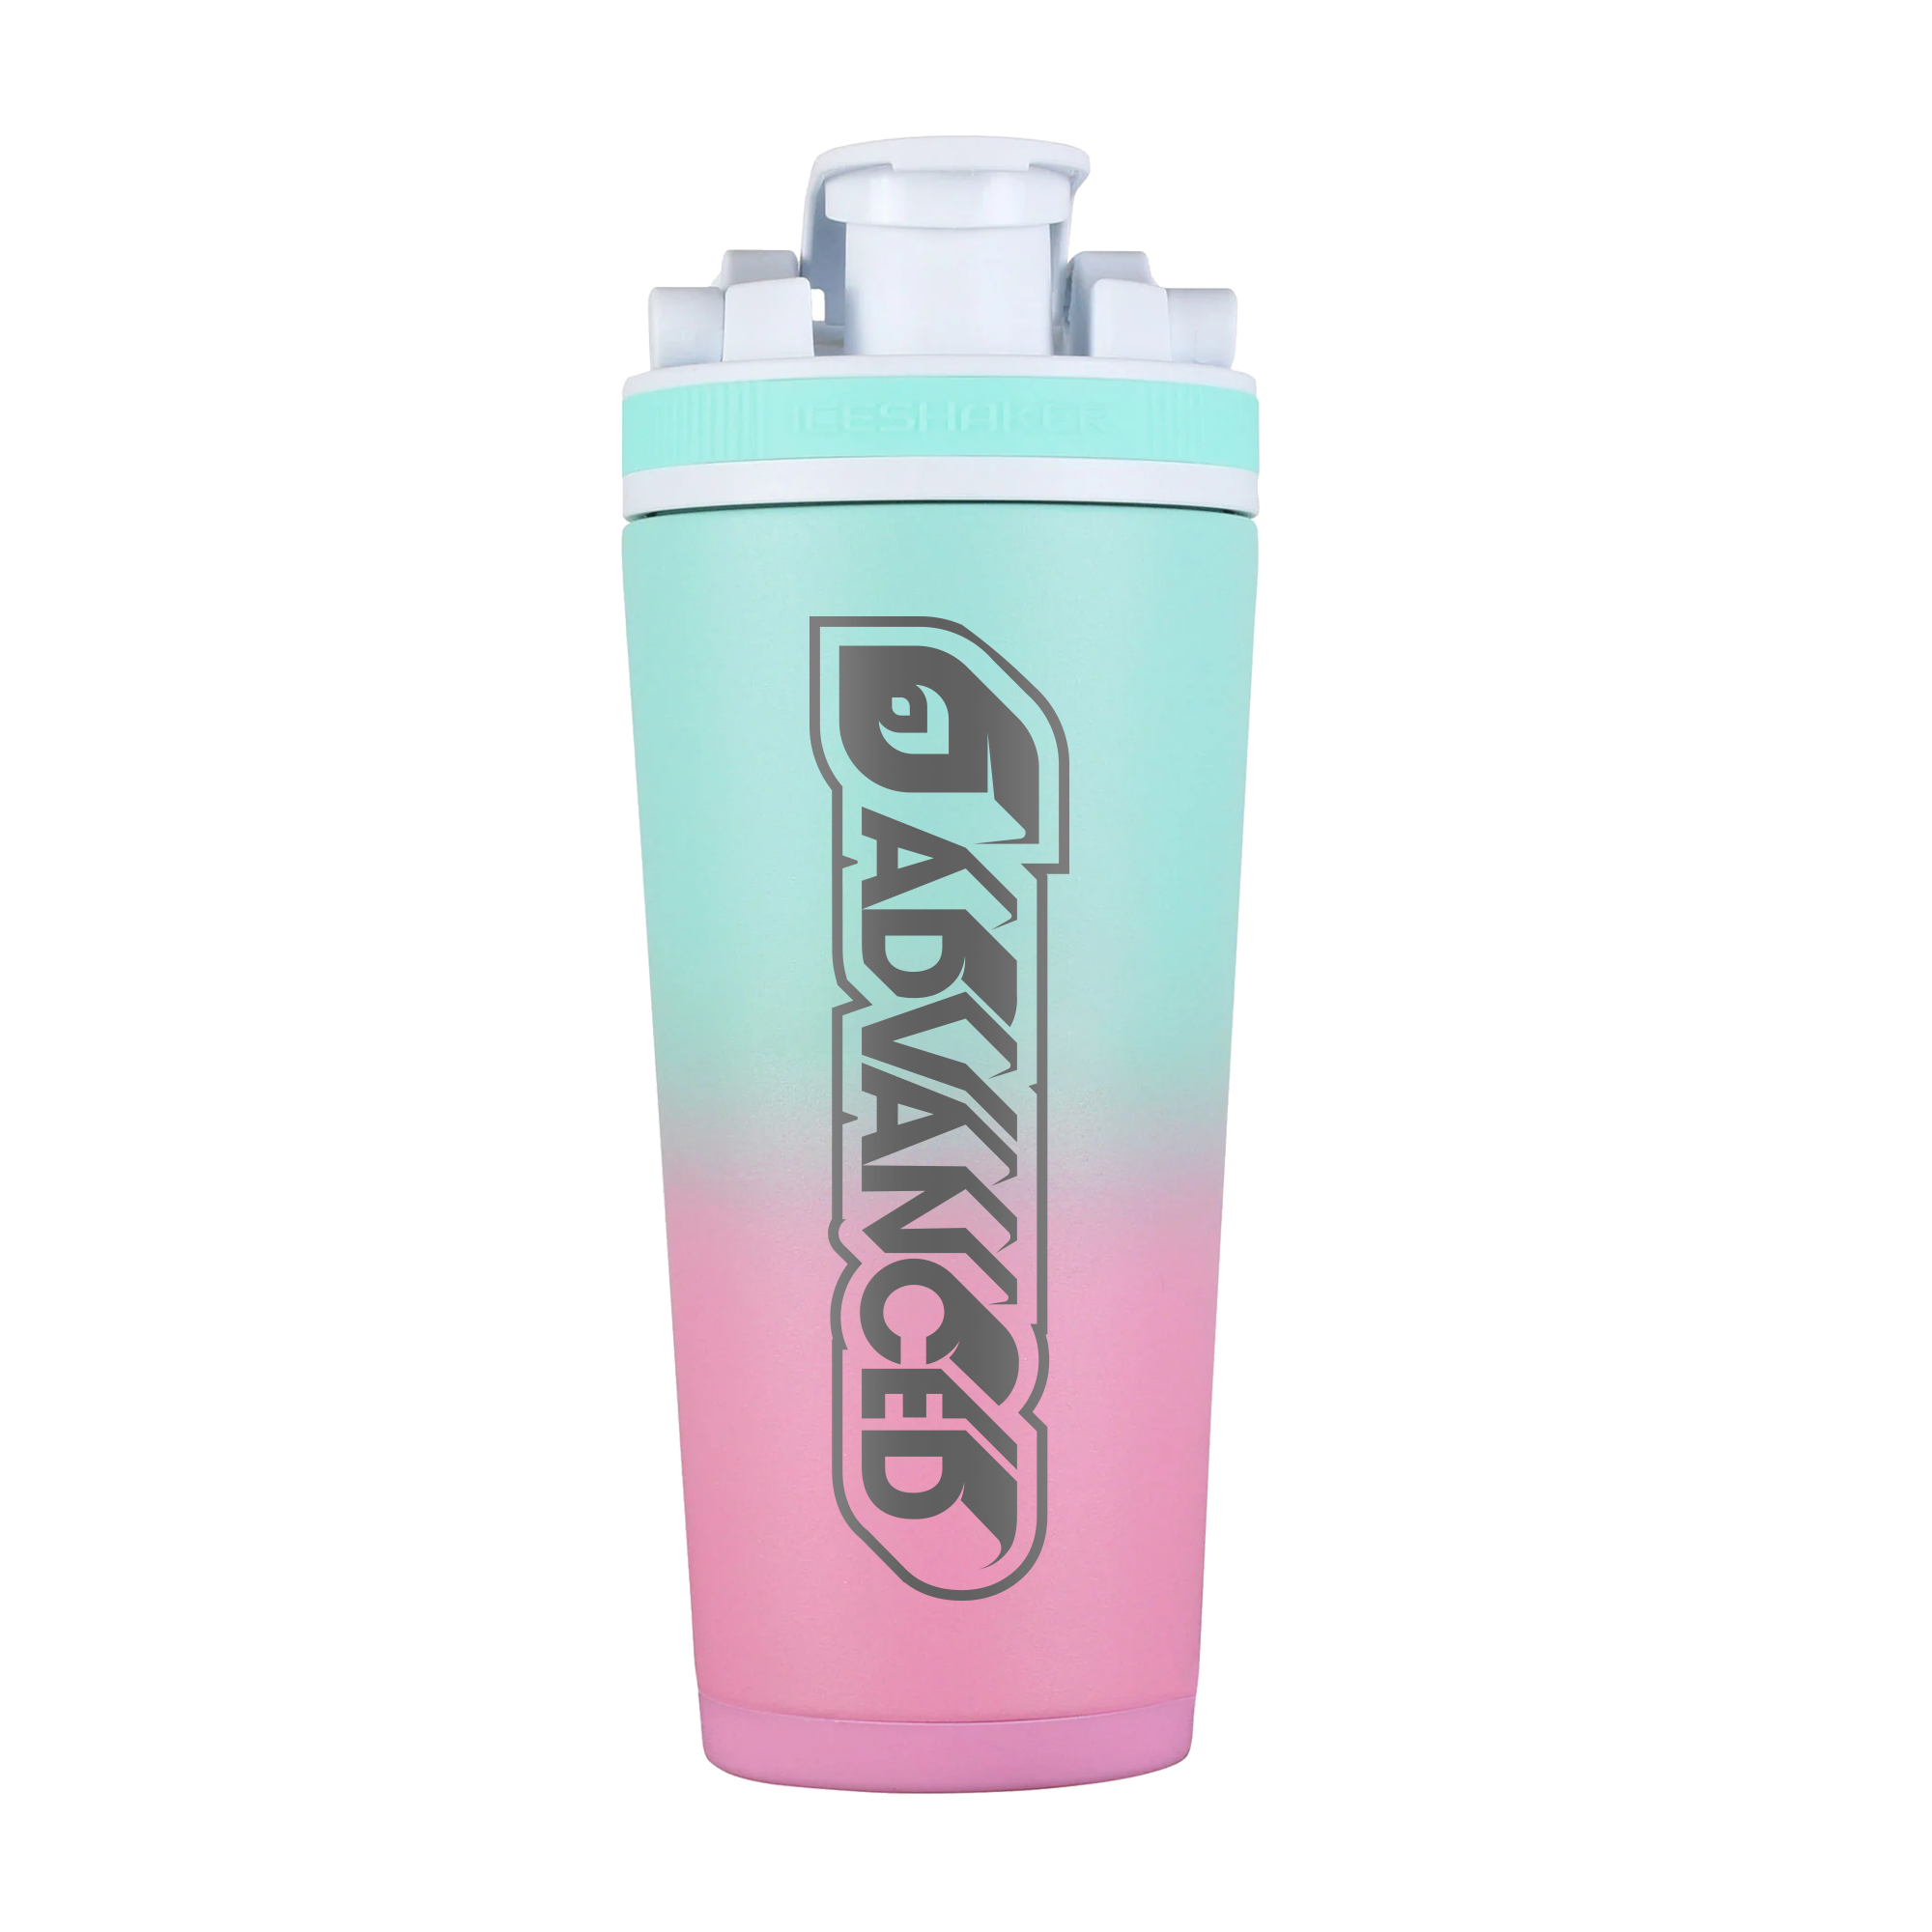 Extruded Vision ADVANCED Premium 26oz Ice Shaker - Pink/Mint